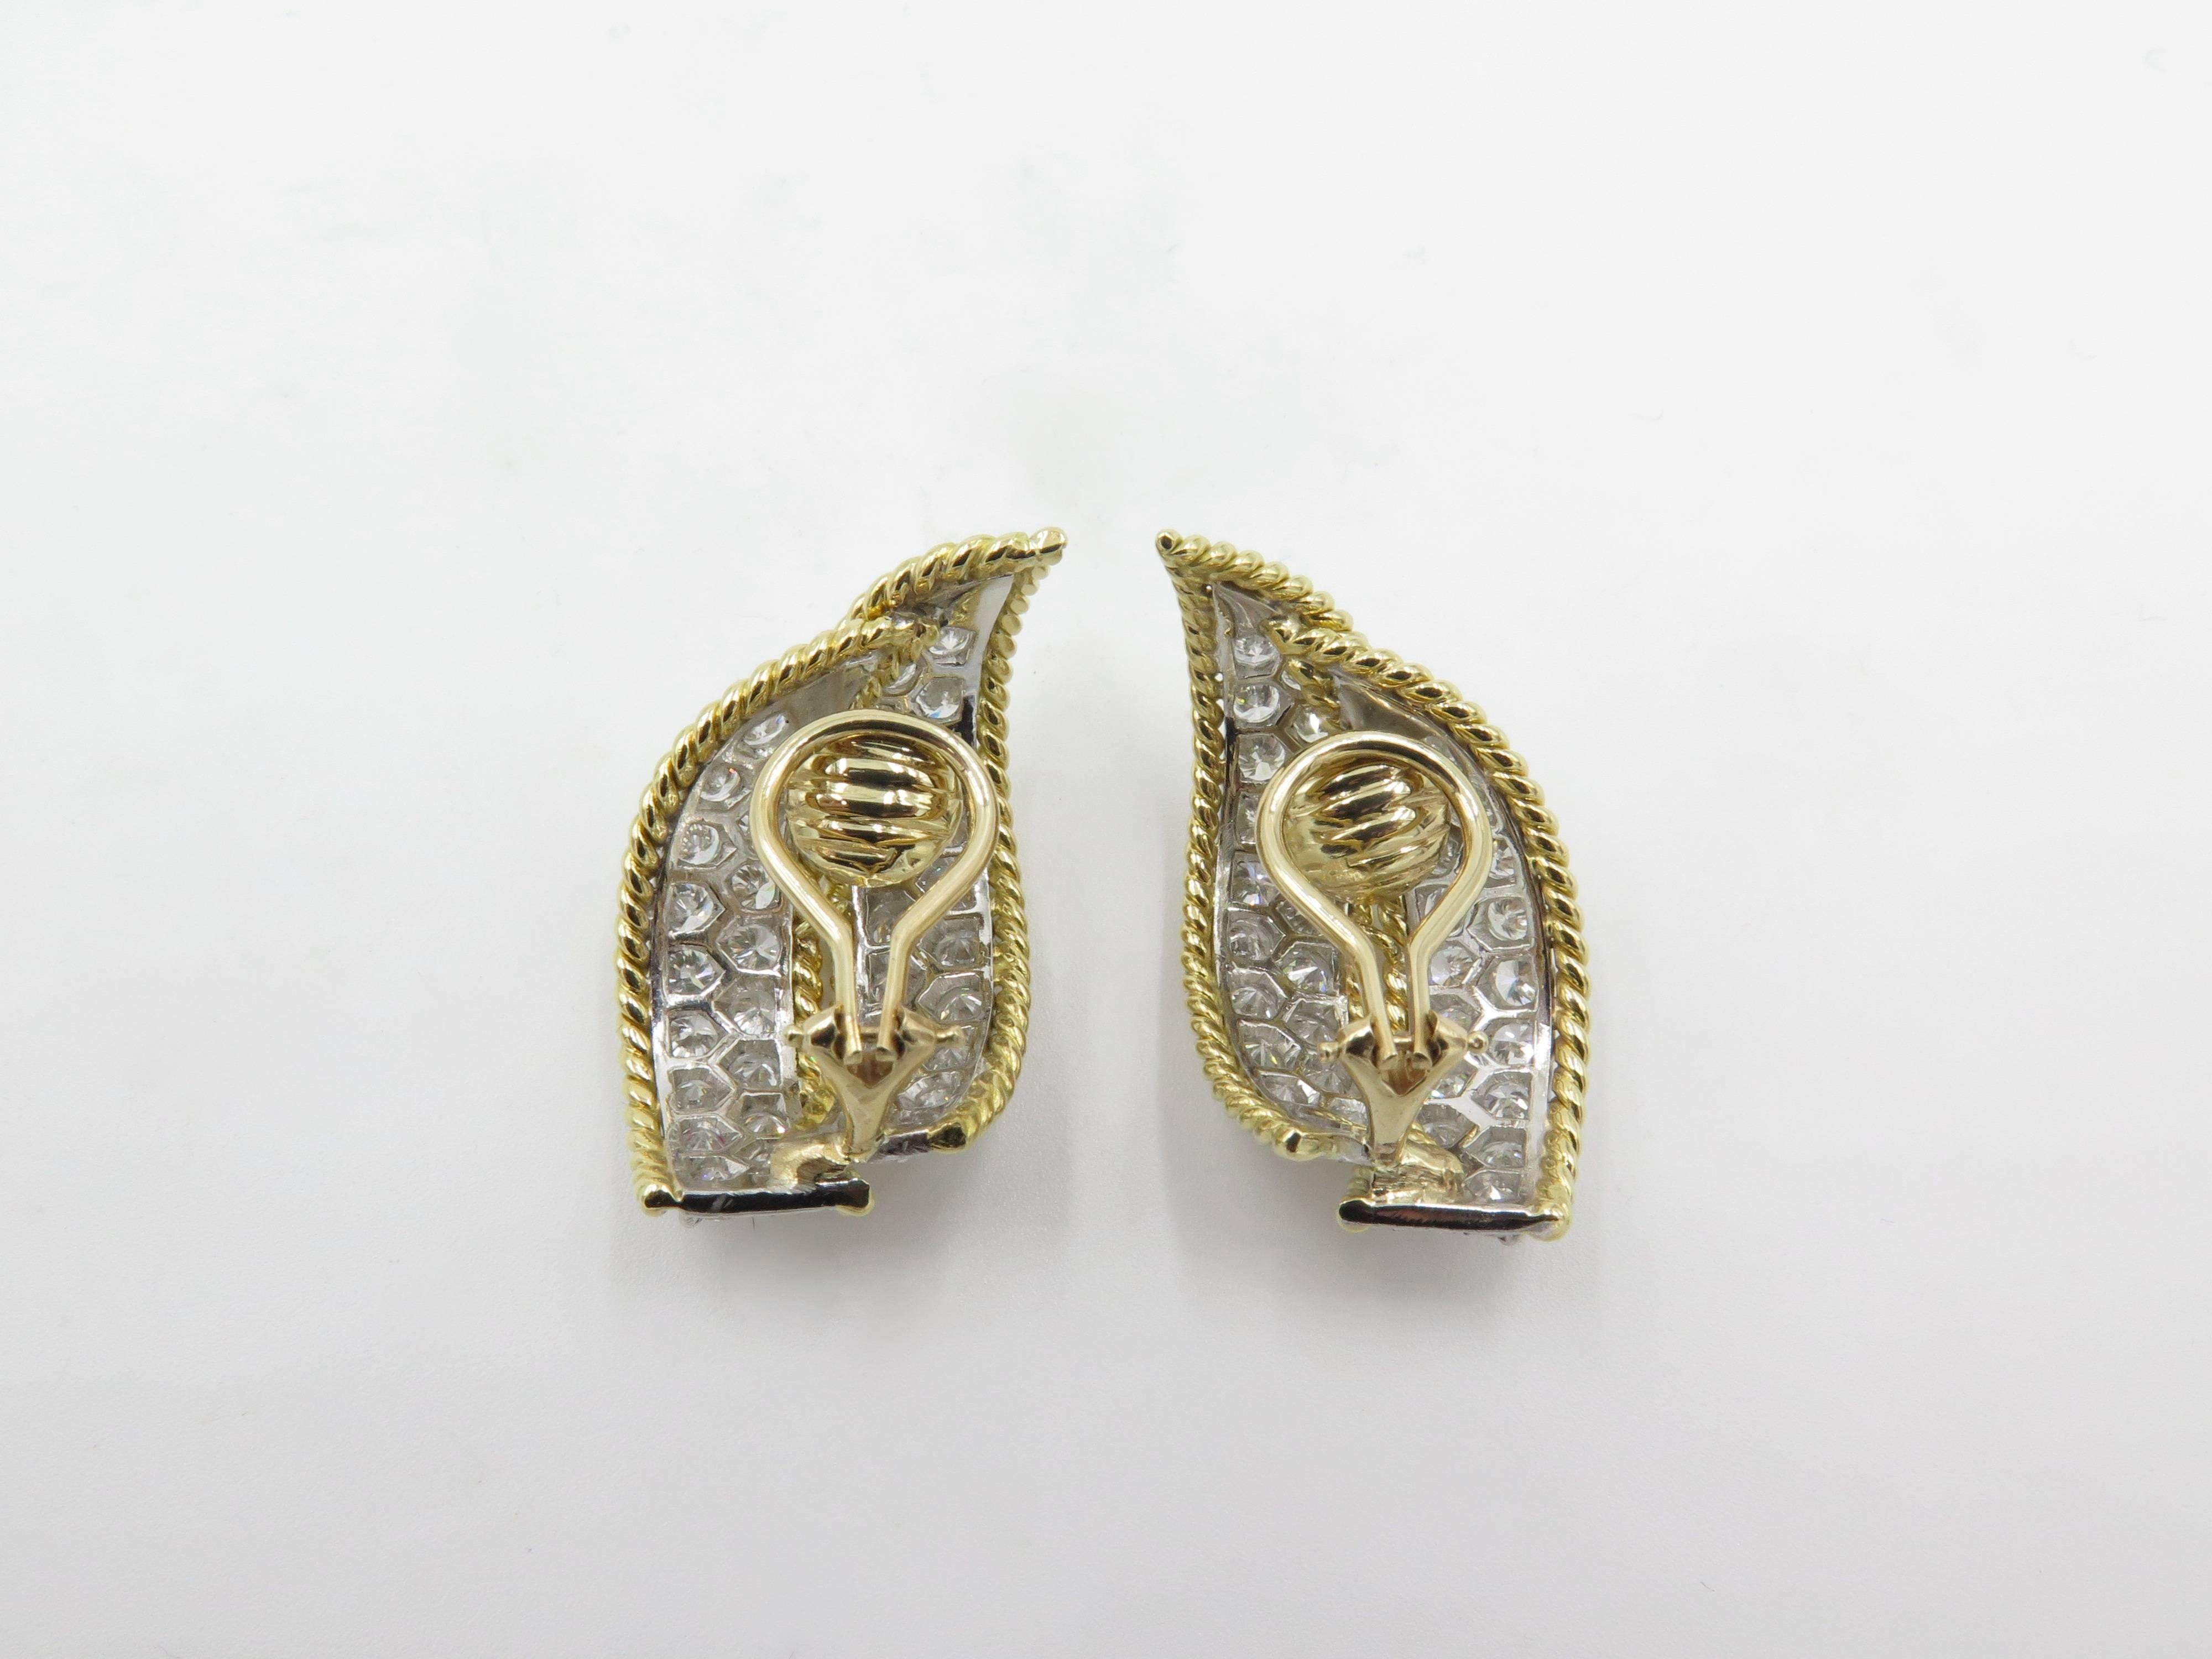 A pair of 18 karat yellow gold, platinum set diamond earrings with 14 karat yellow gold clip.  Circa 1965. Each designed as a pave set diamond scroll, enhanced by gold rope work. Fifty two (52) diamonds weigh approximately 5.20 carats. Length is